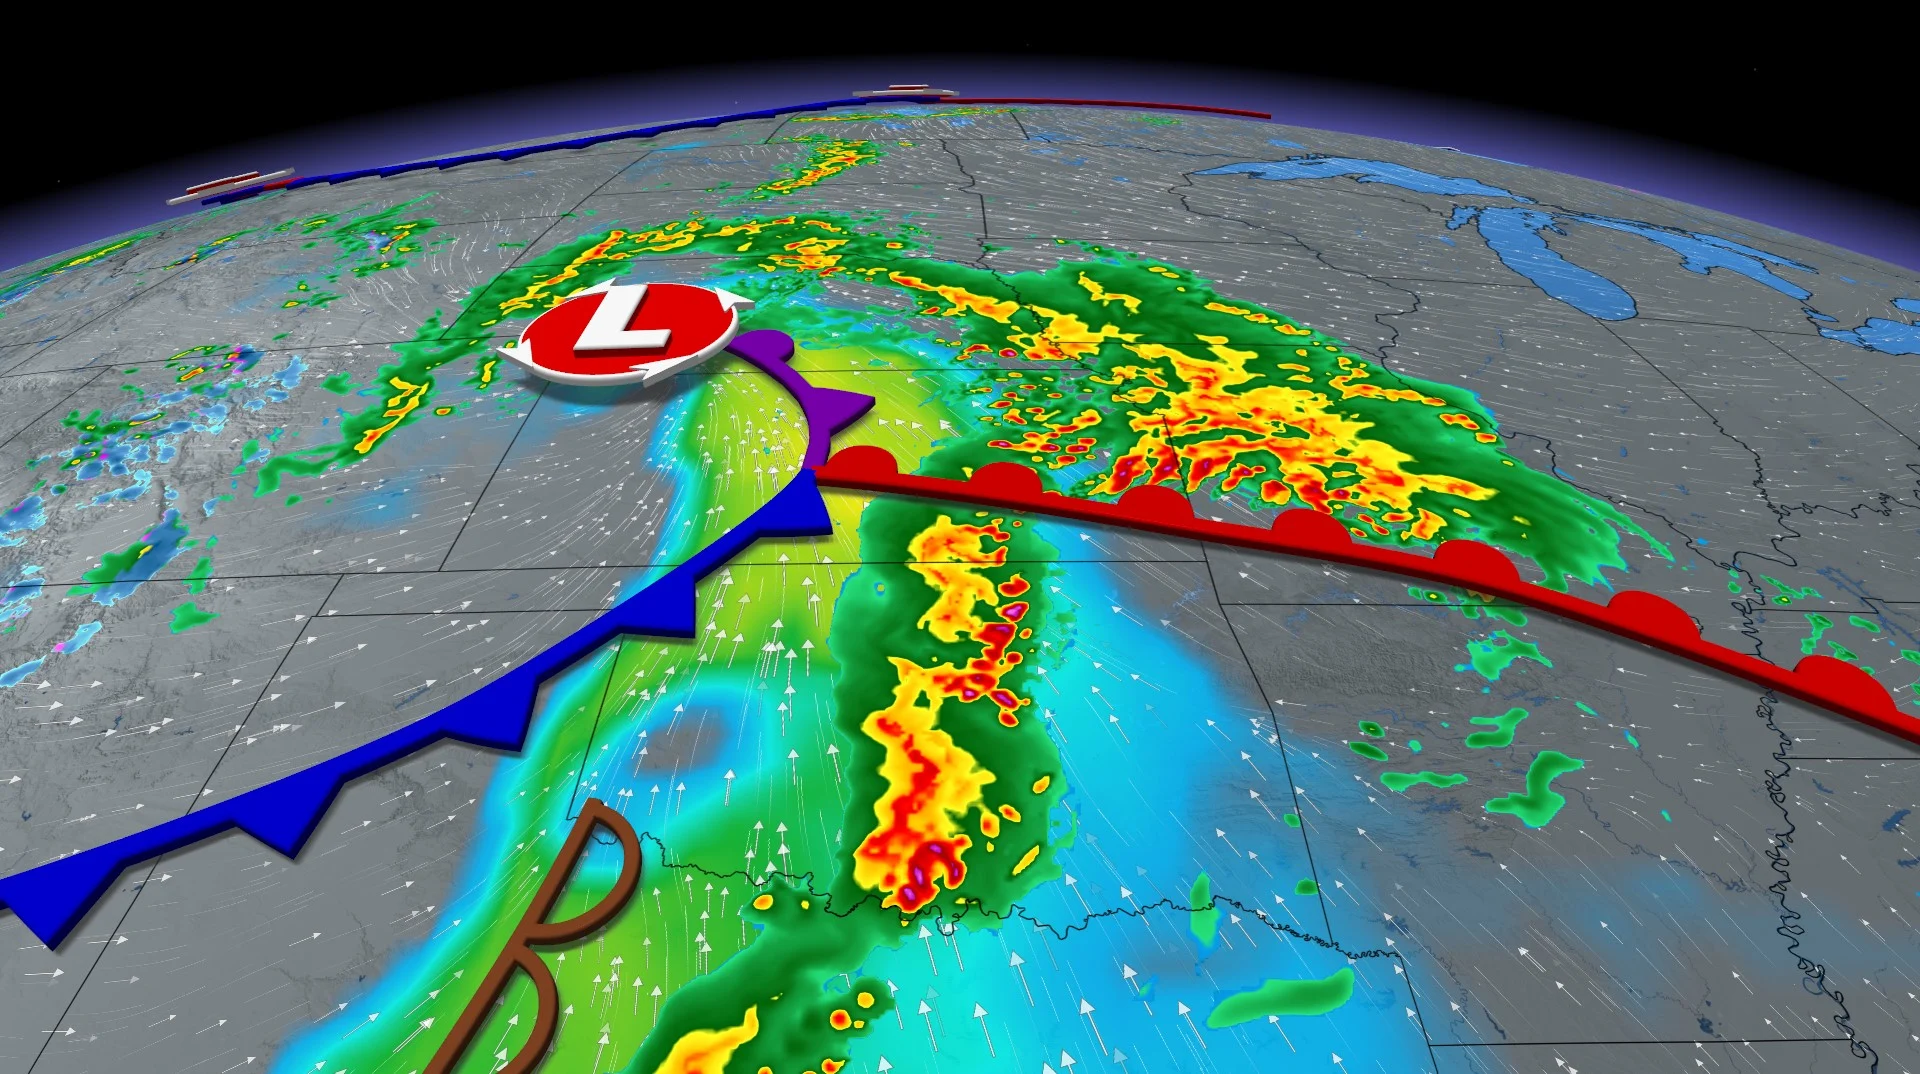 Travellers beware: Multiple days of severe storm risk unfolds in the U.S.